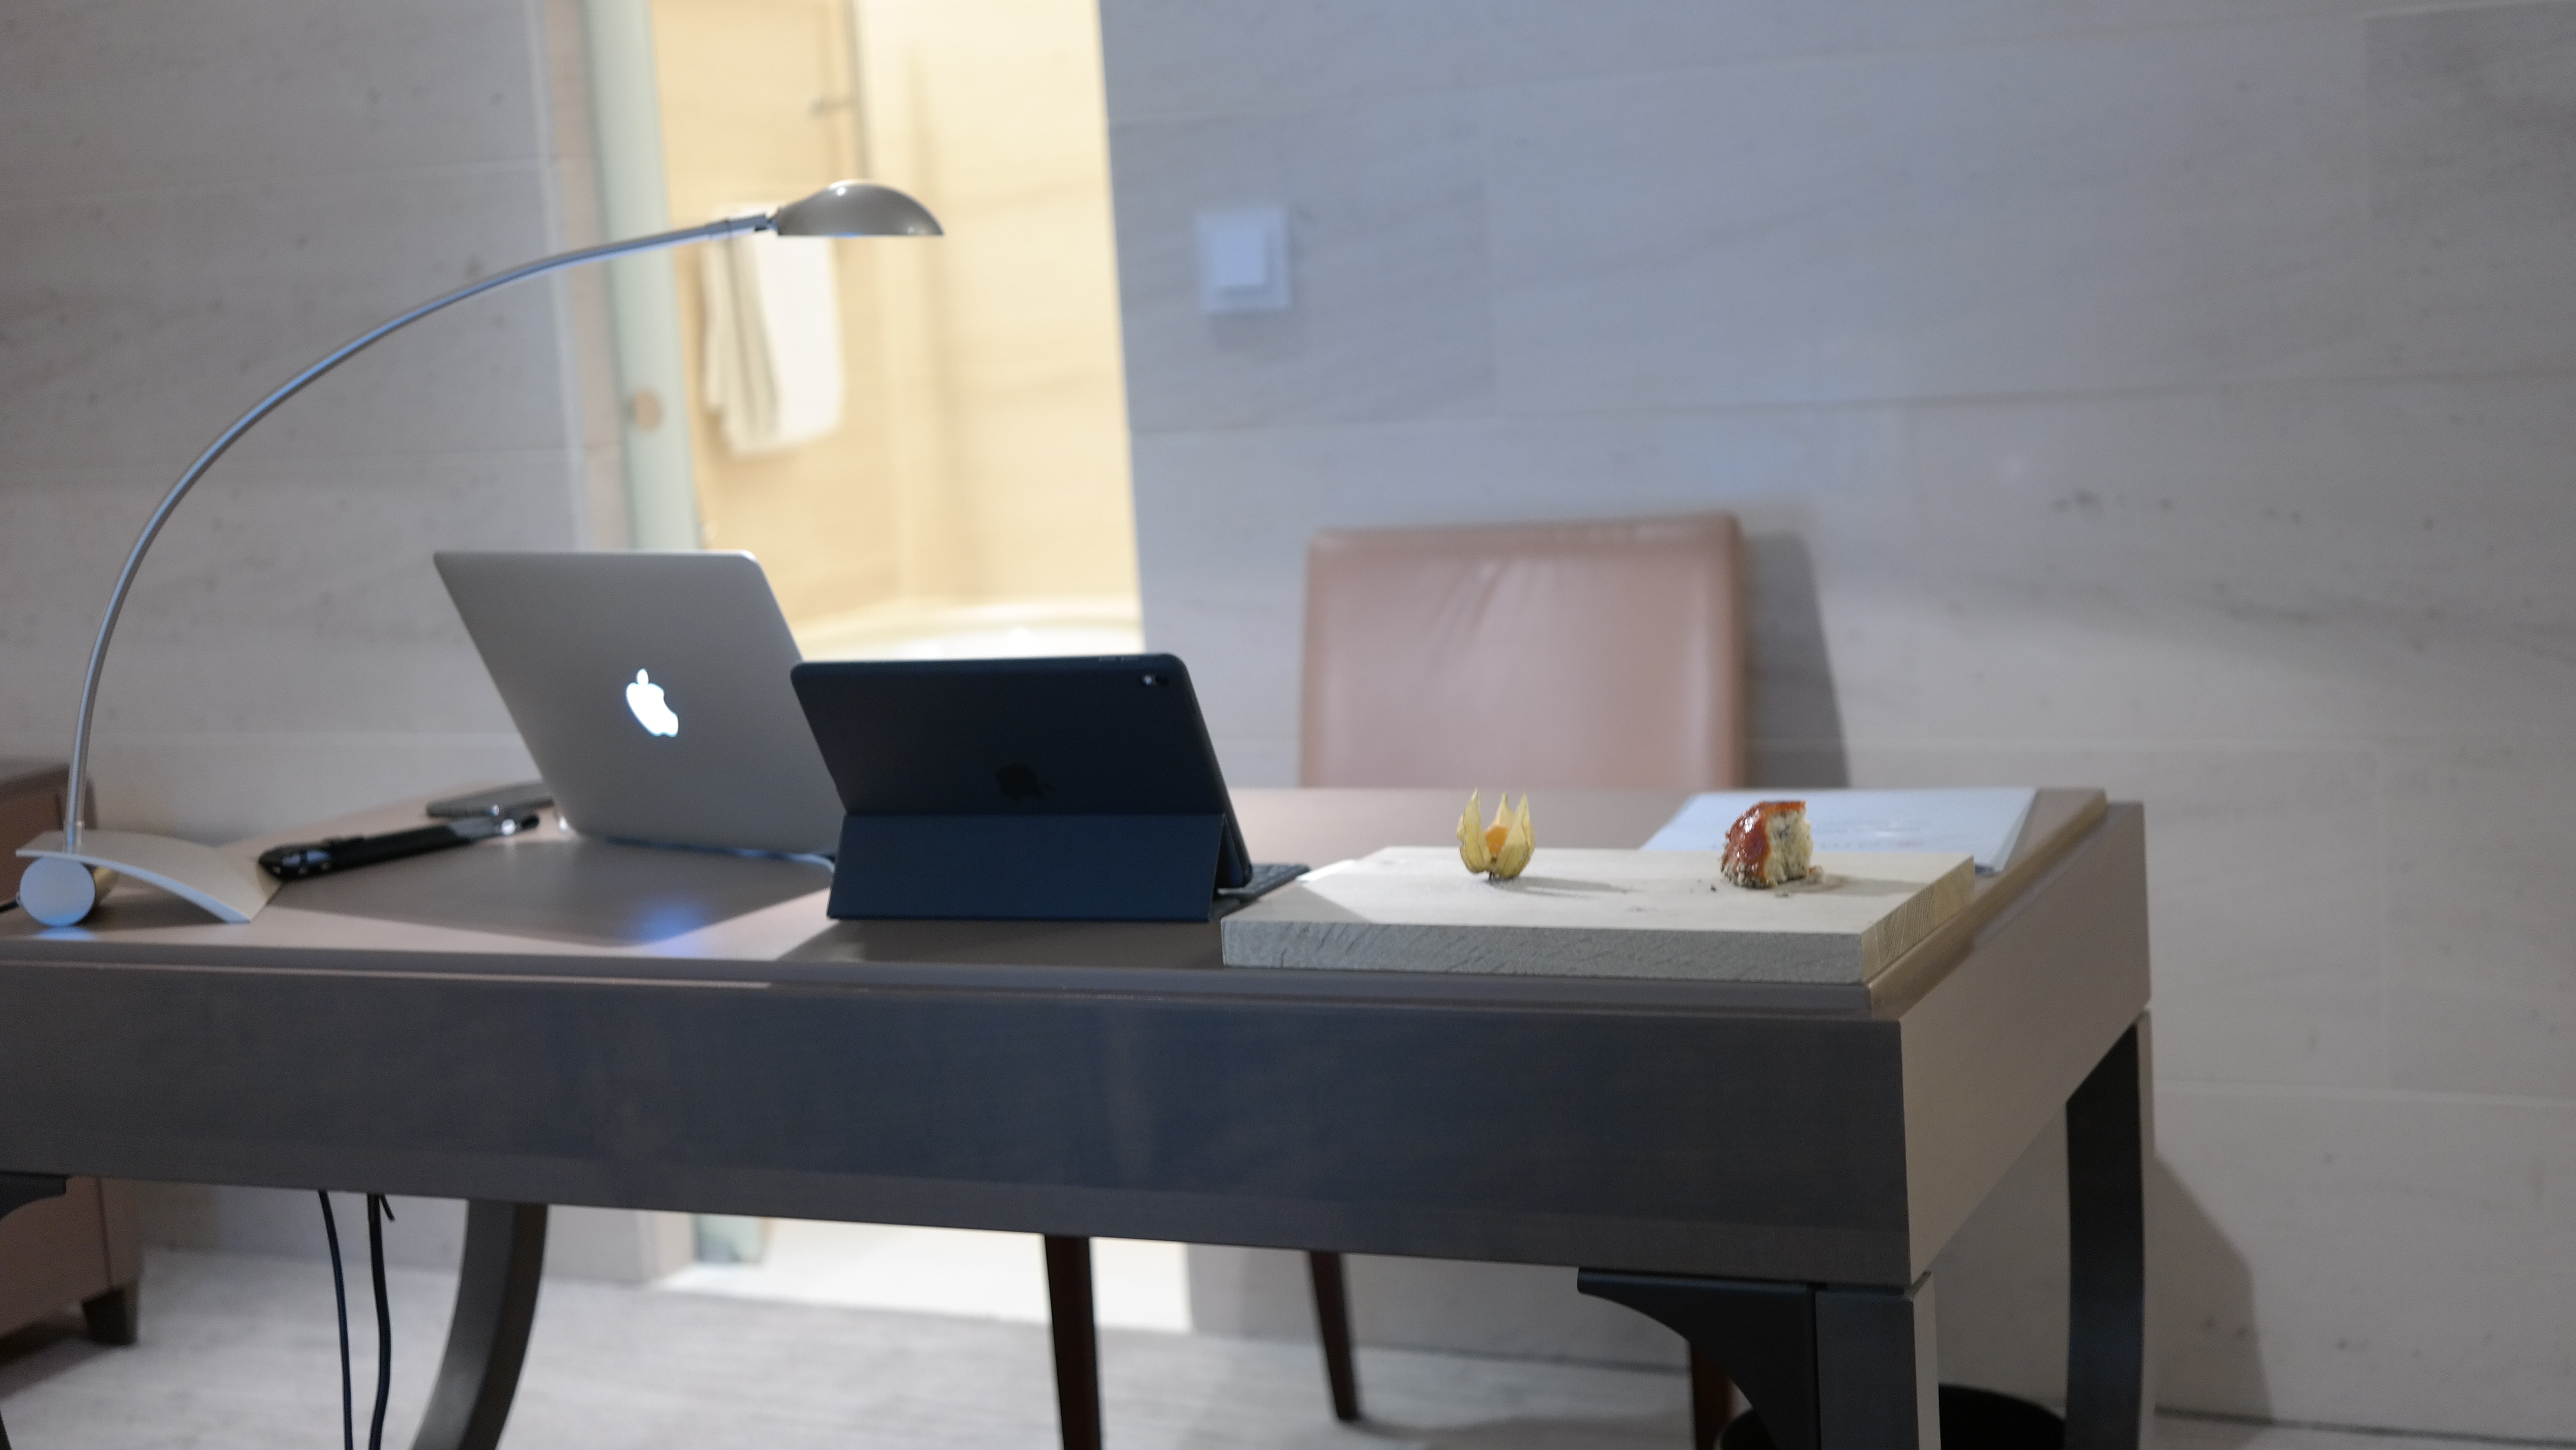 Silver Macbook on Gray Table, Chair, Light, Wooden, Wood, HQ Photo